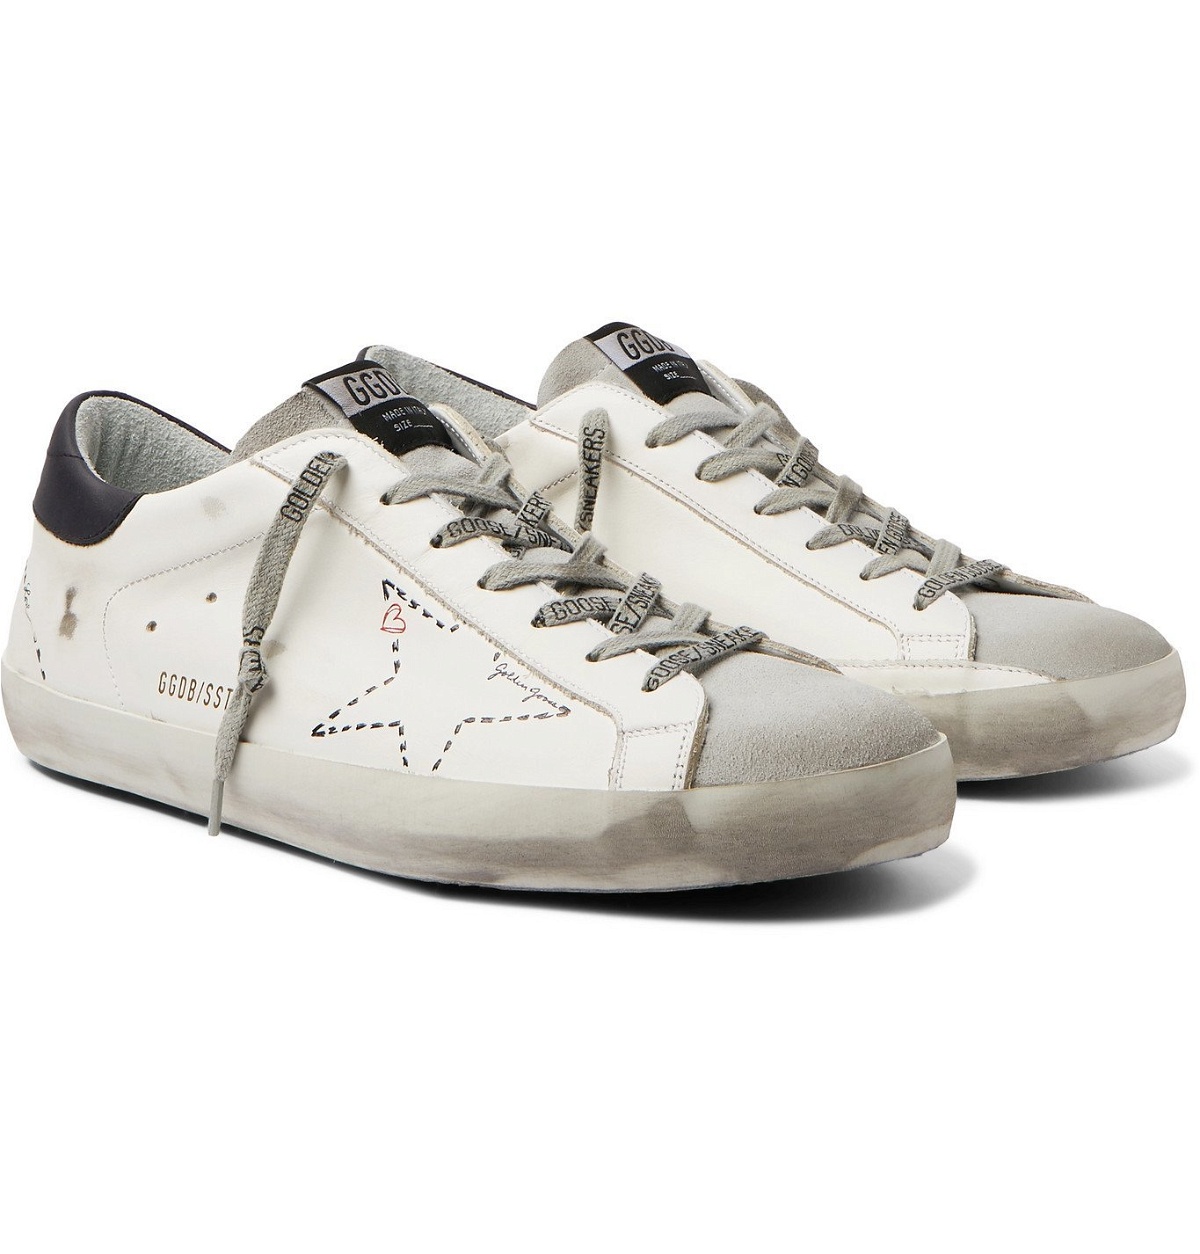 Golden Goose - Superstar Distressed Leather and Suede Sneakers - White  Golden Goose Deluxe Brand